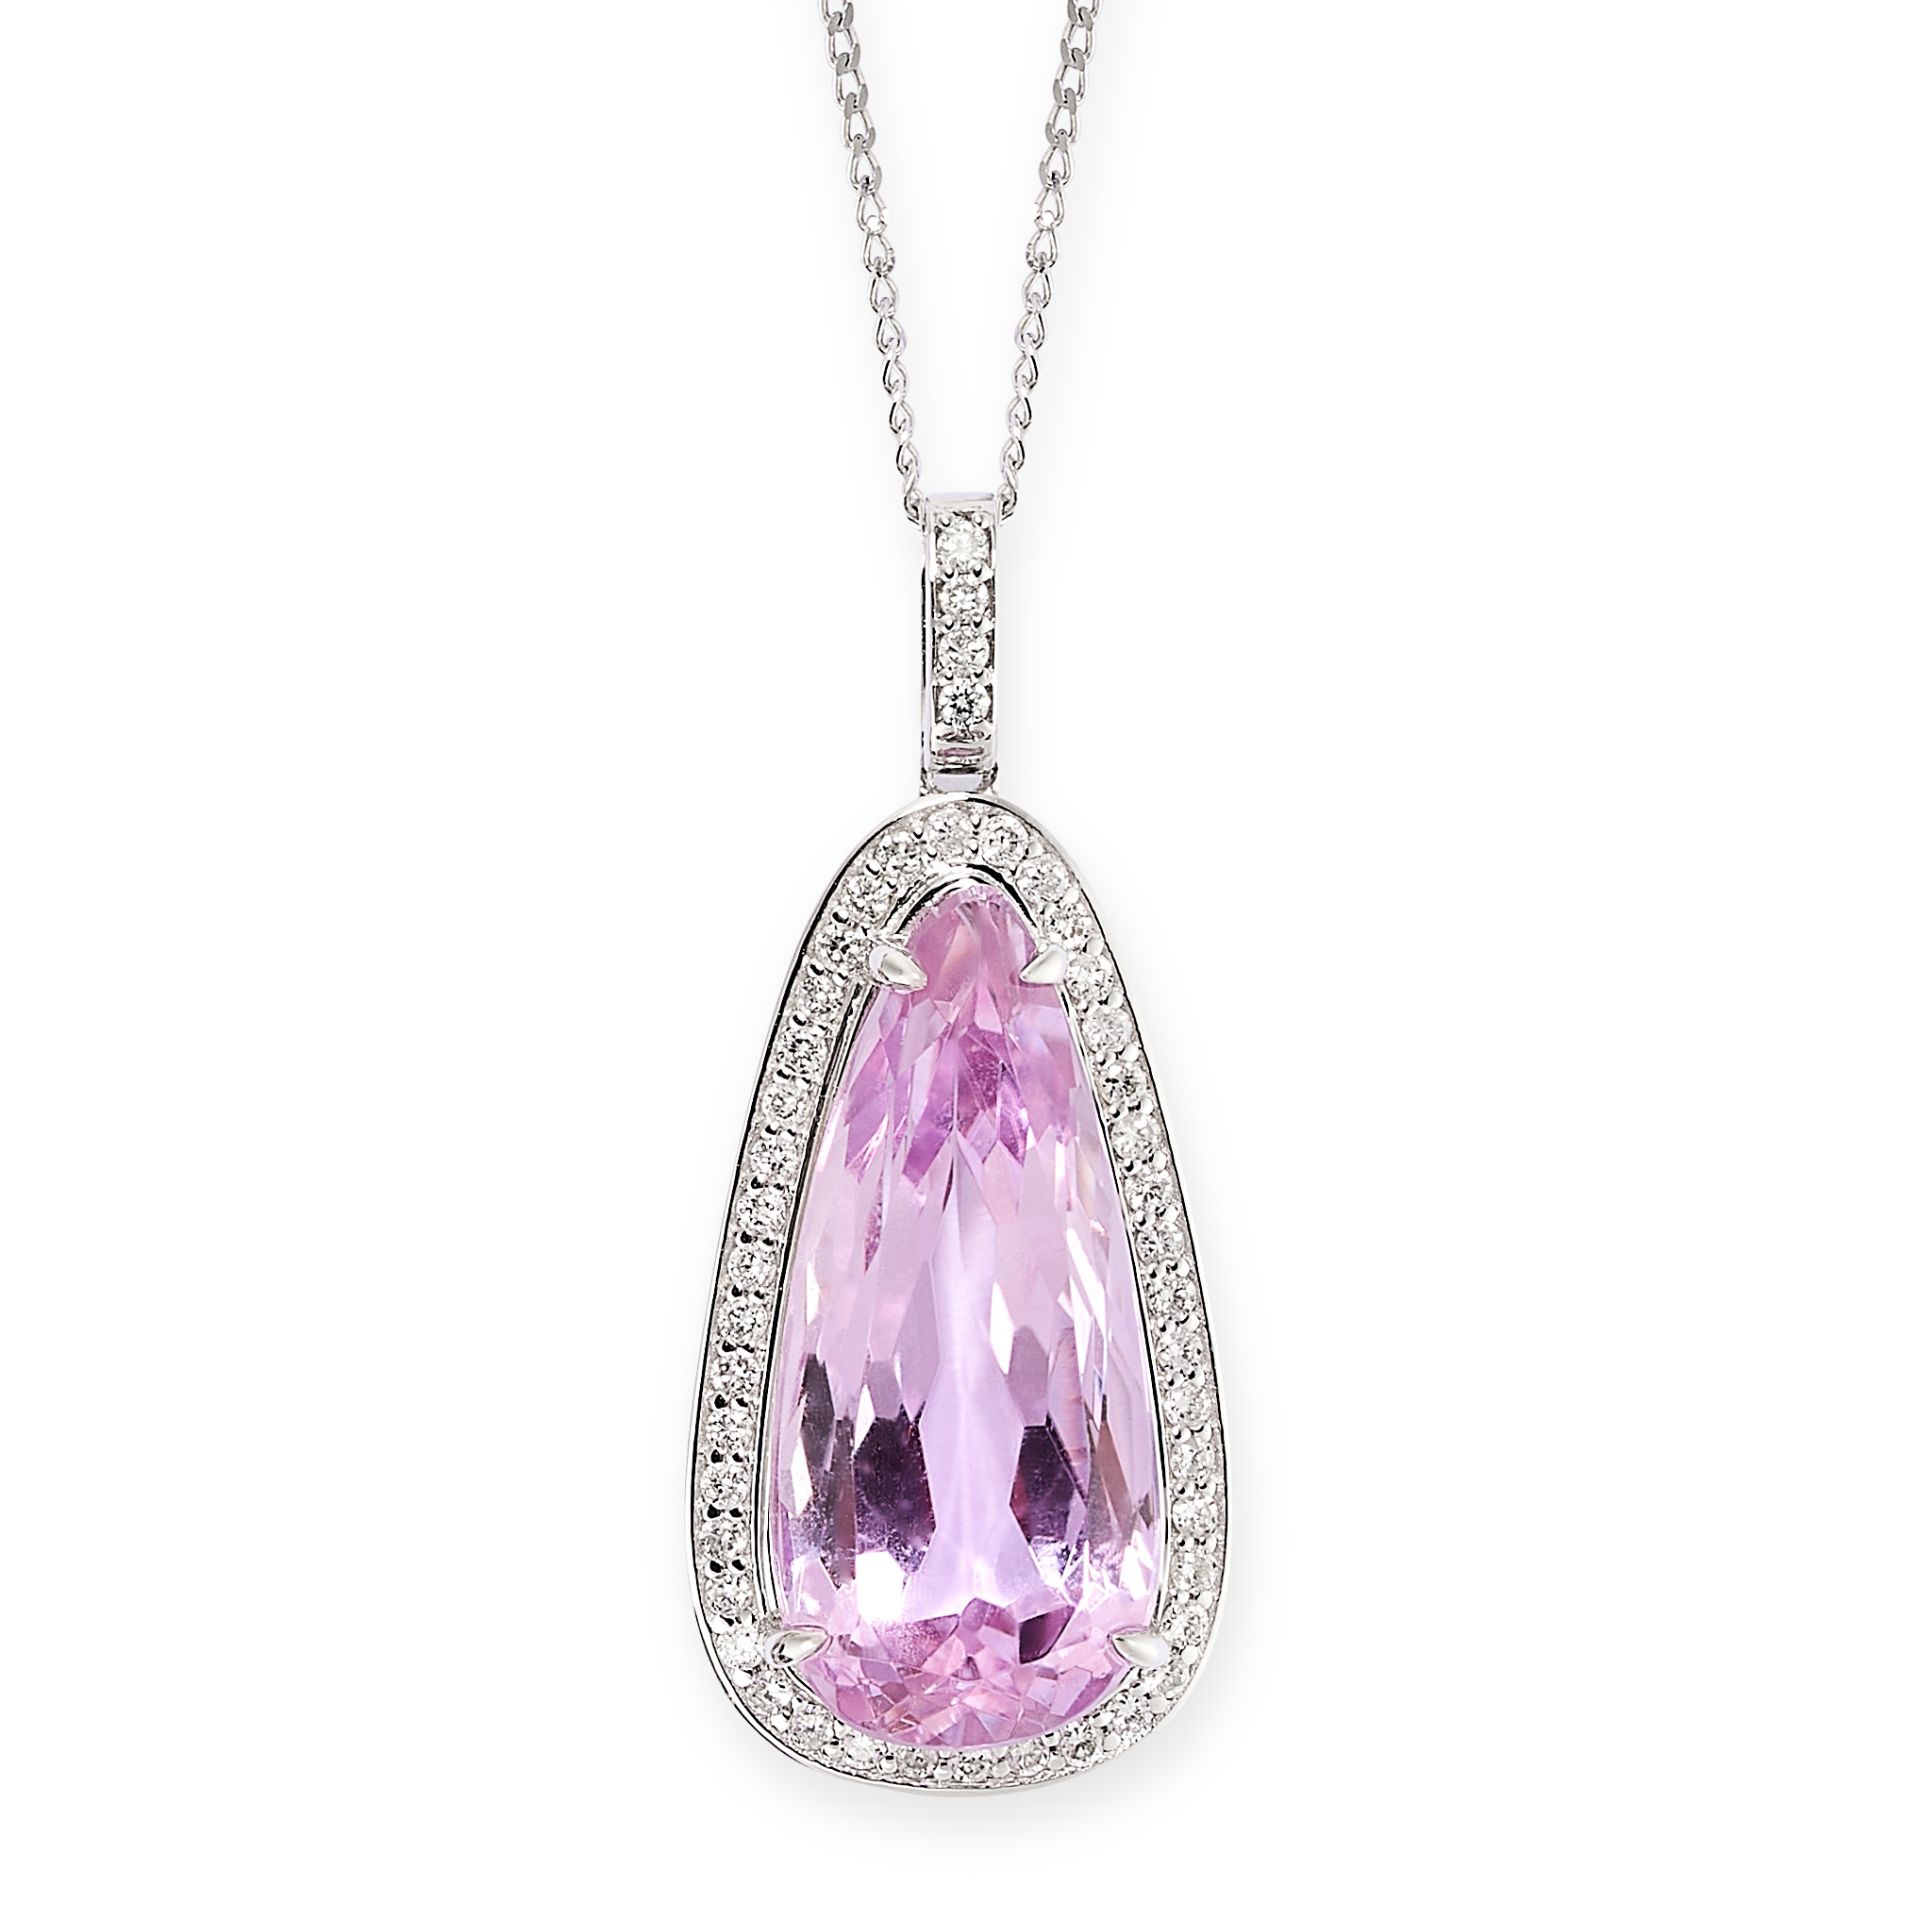 A KUNZITE AND DIAMOND PENDANT NECKLACE in 18ct gold, set with a pear cut kunzite of 6.41 carats with